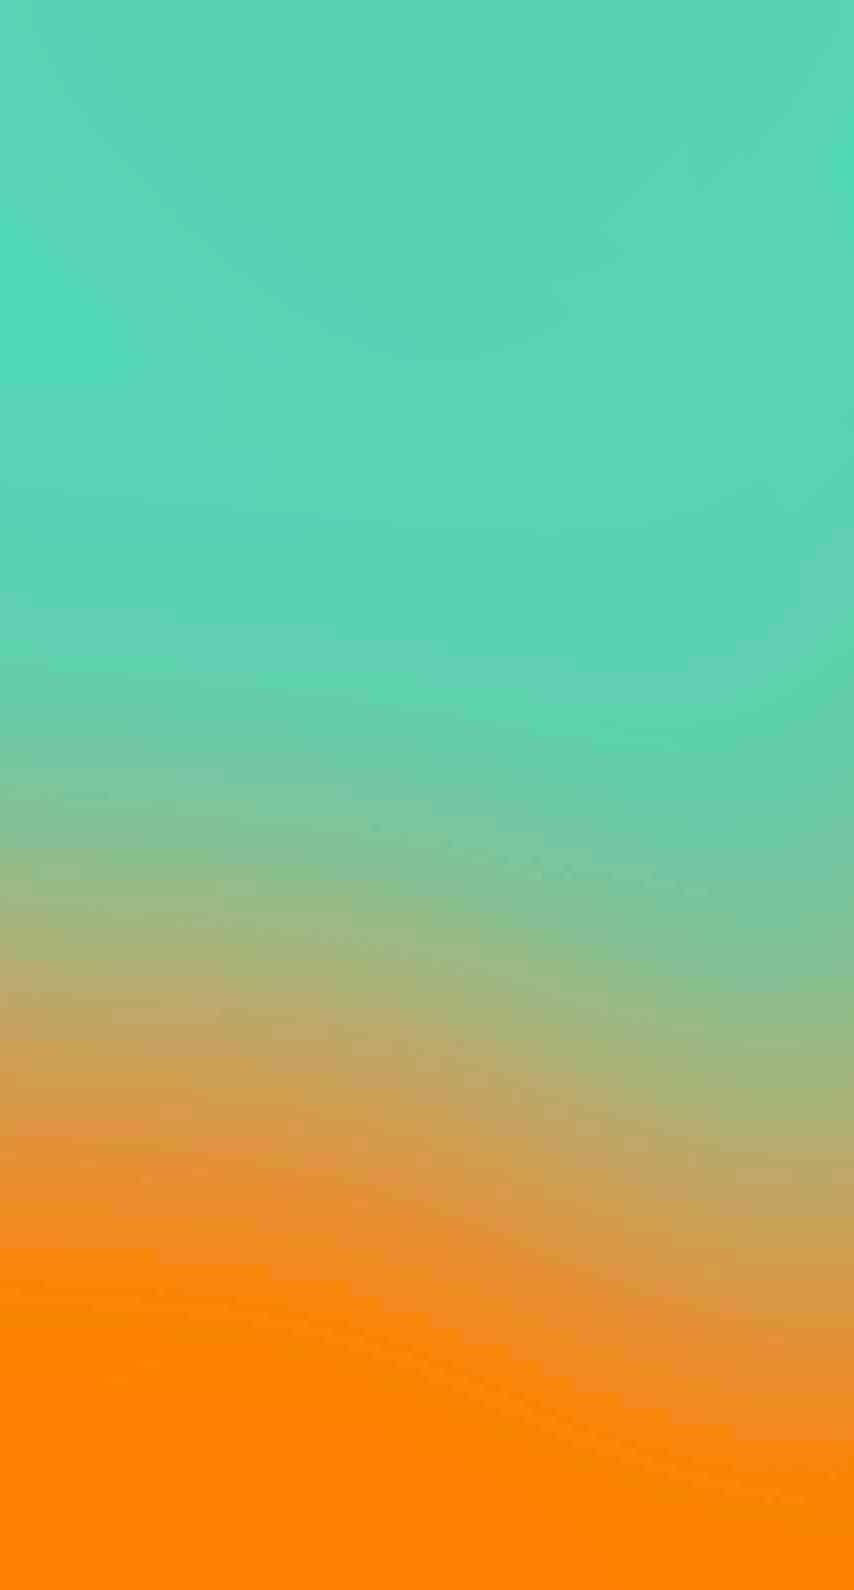 orange and green backgrounds